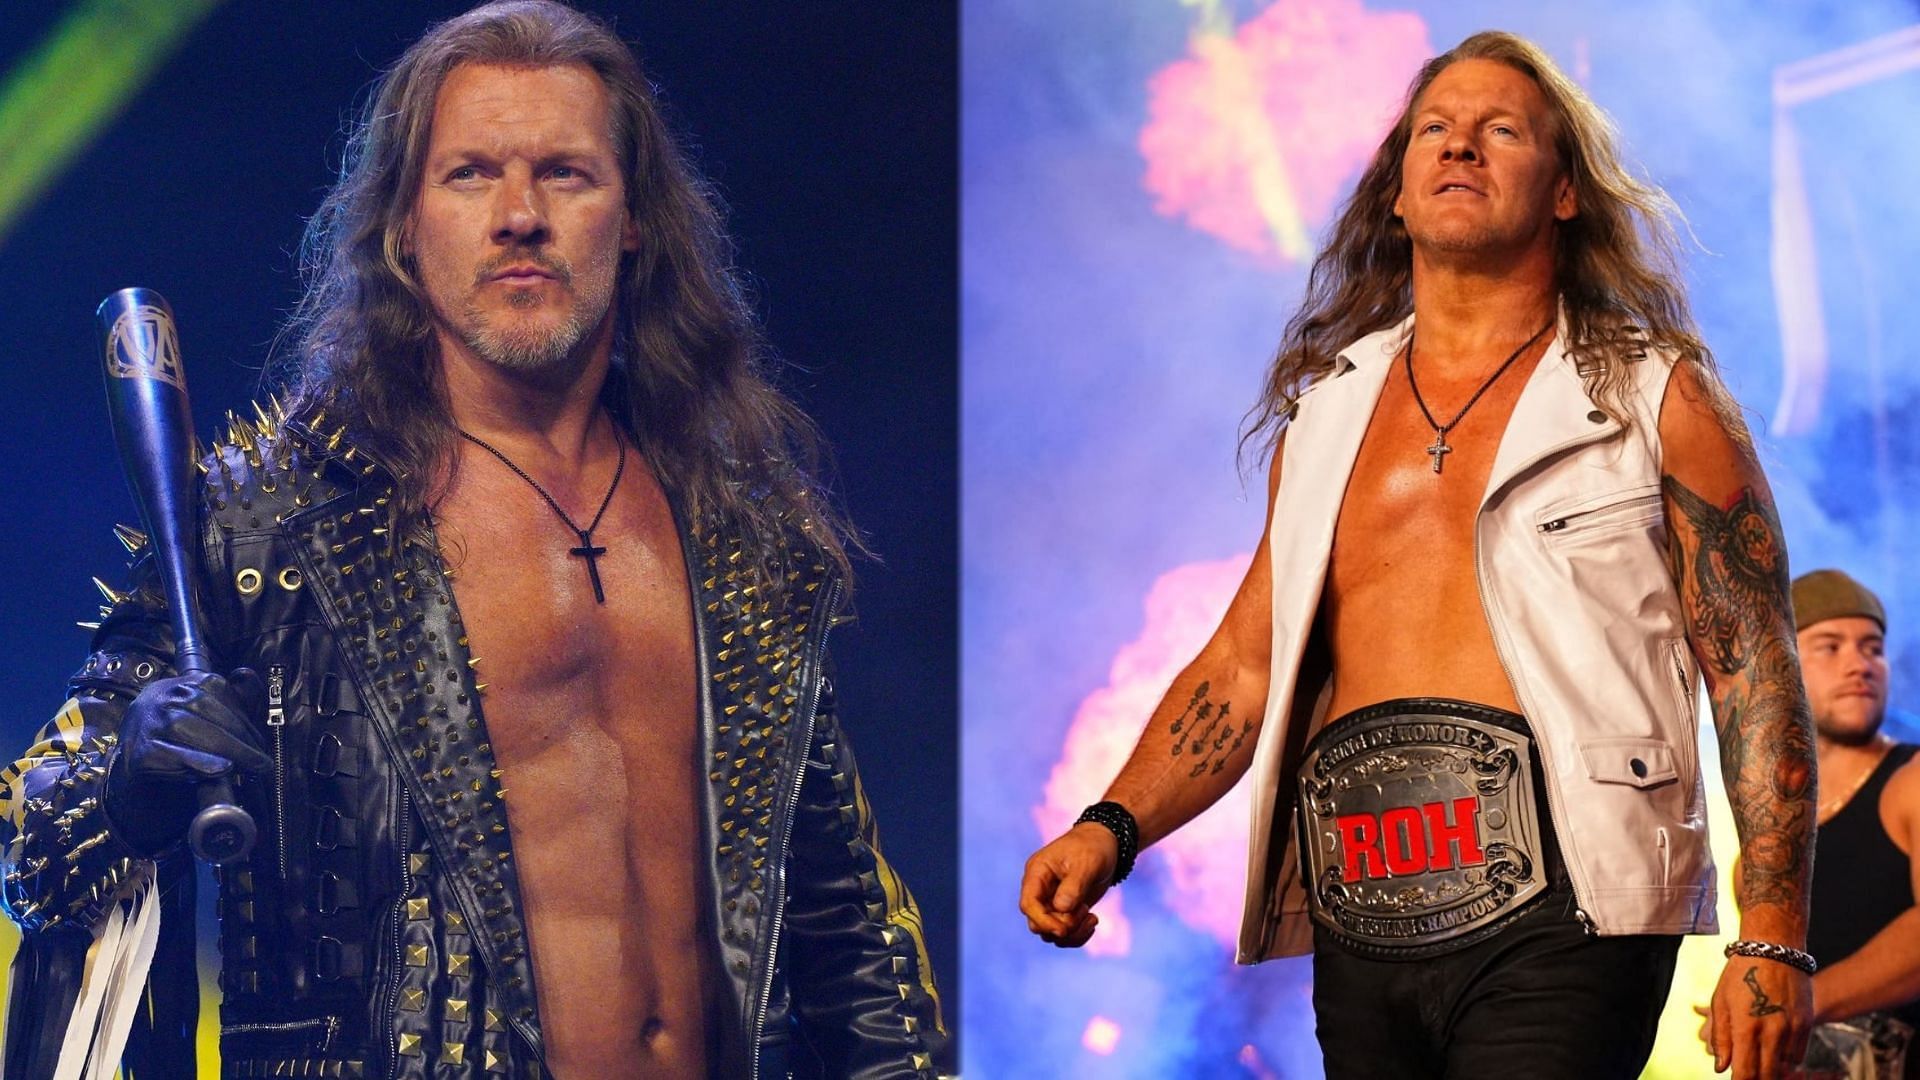 Chris Jericho was one of the most prominently booked AEW stars in 2022.